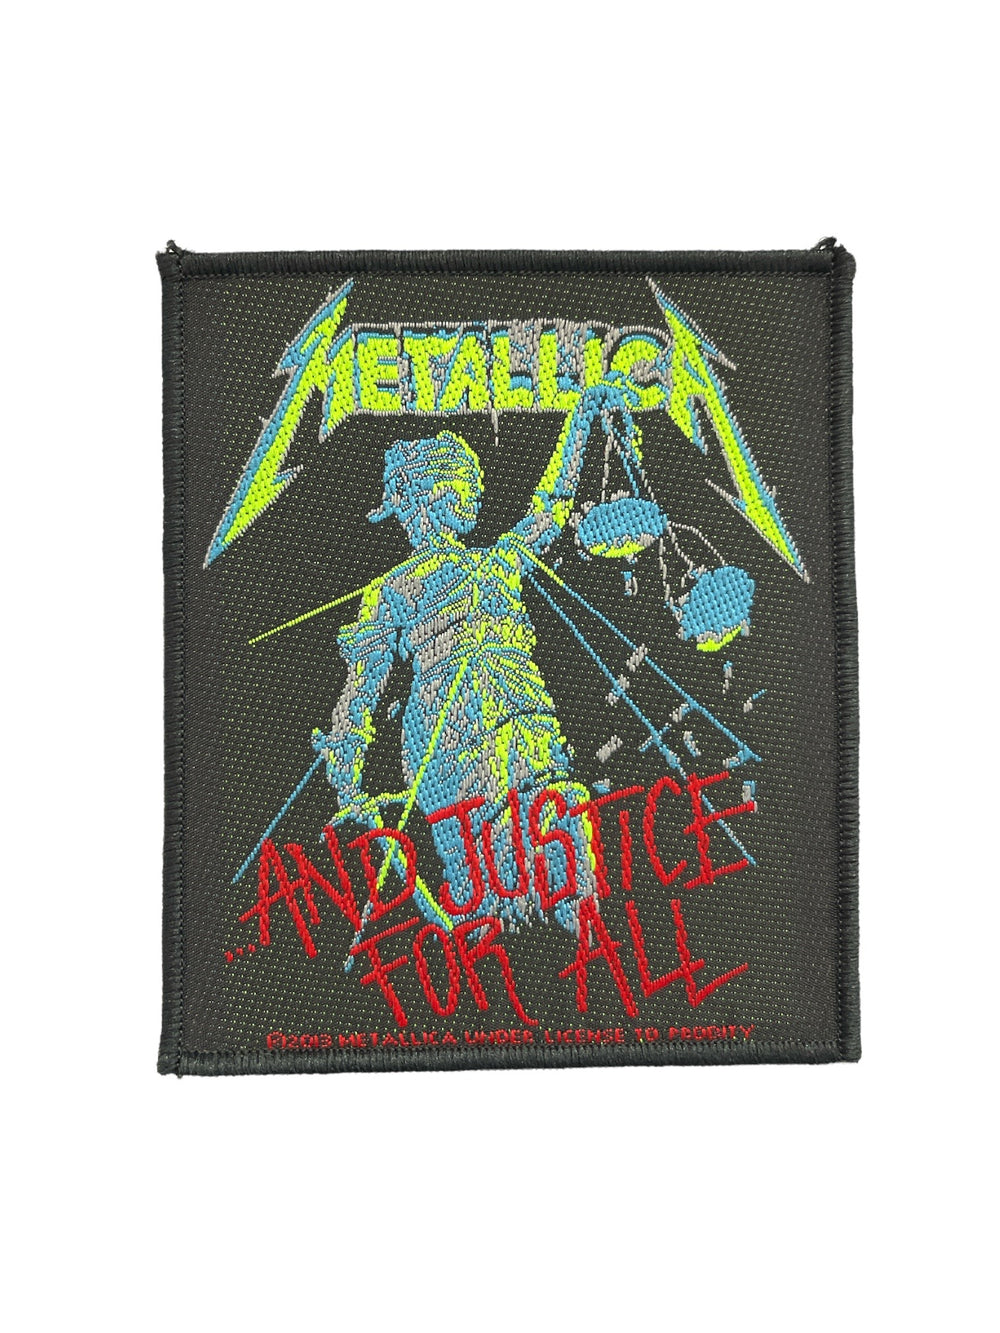 Metallica Justice For All Official Woven Patch Brand New